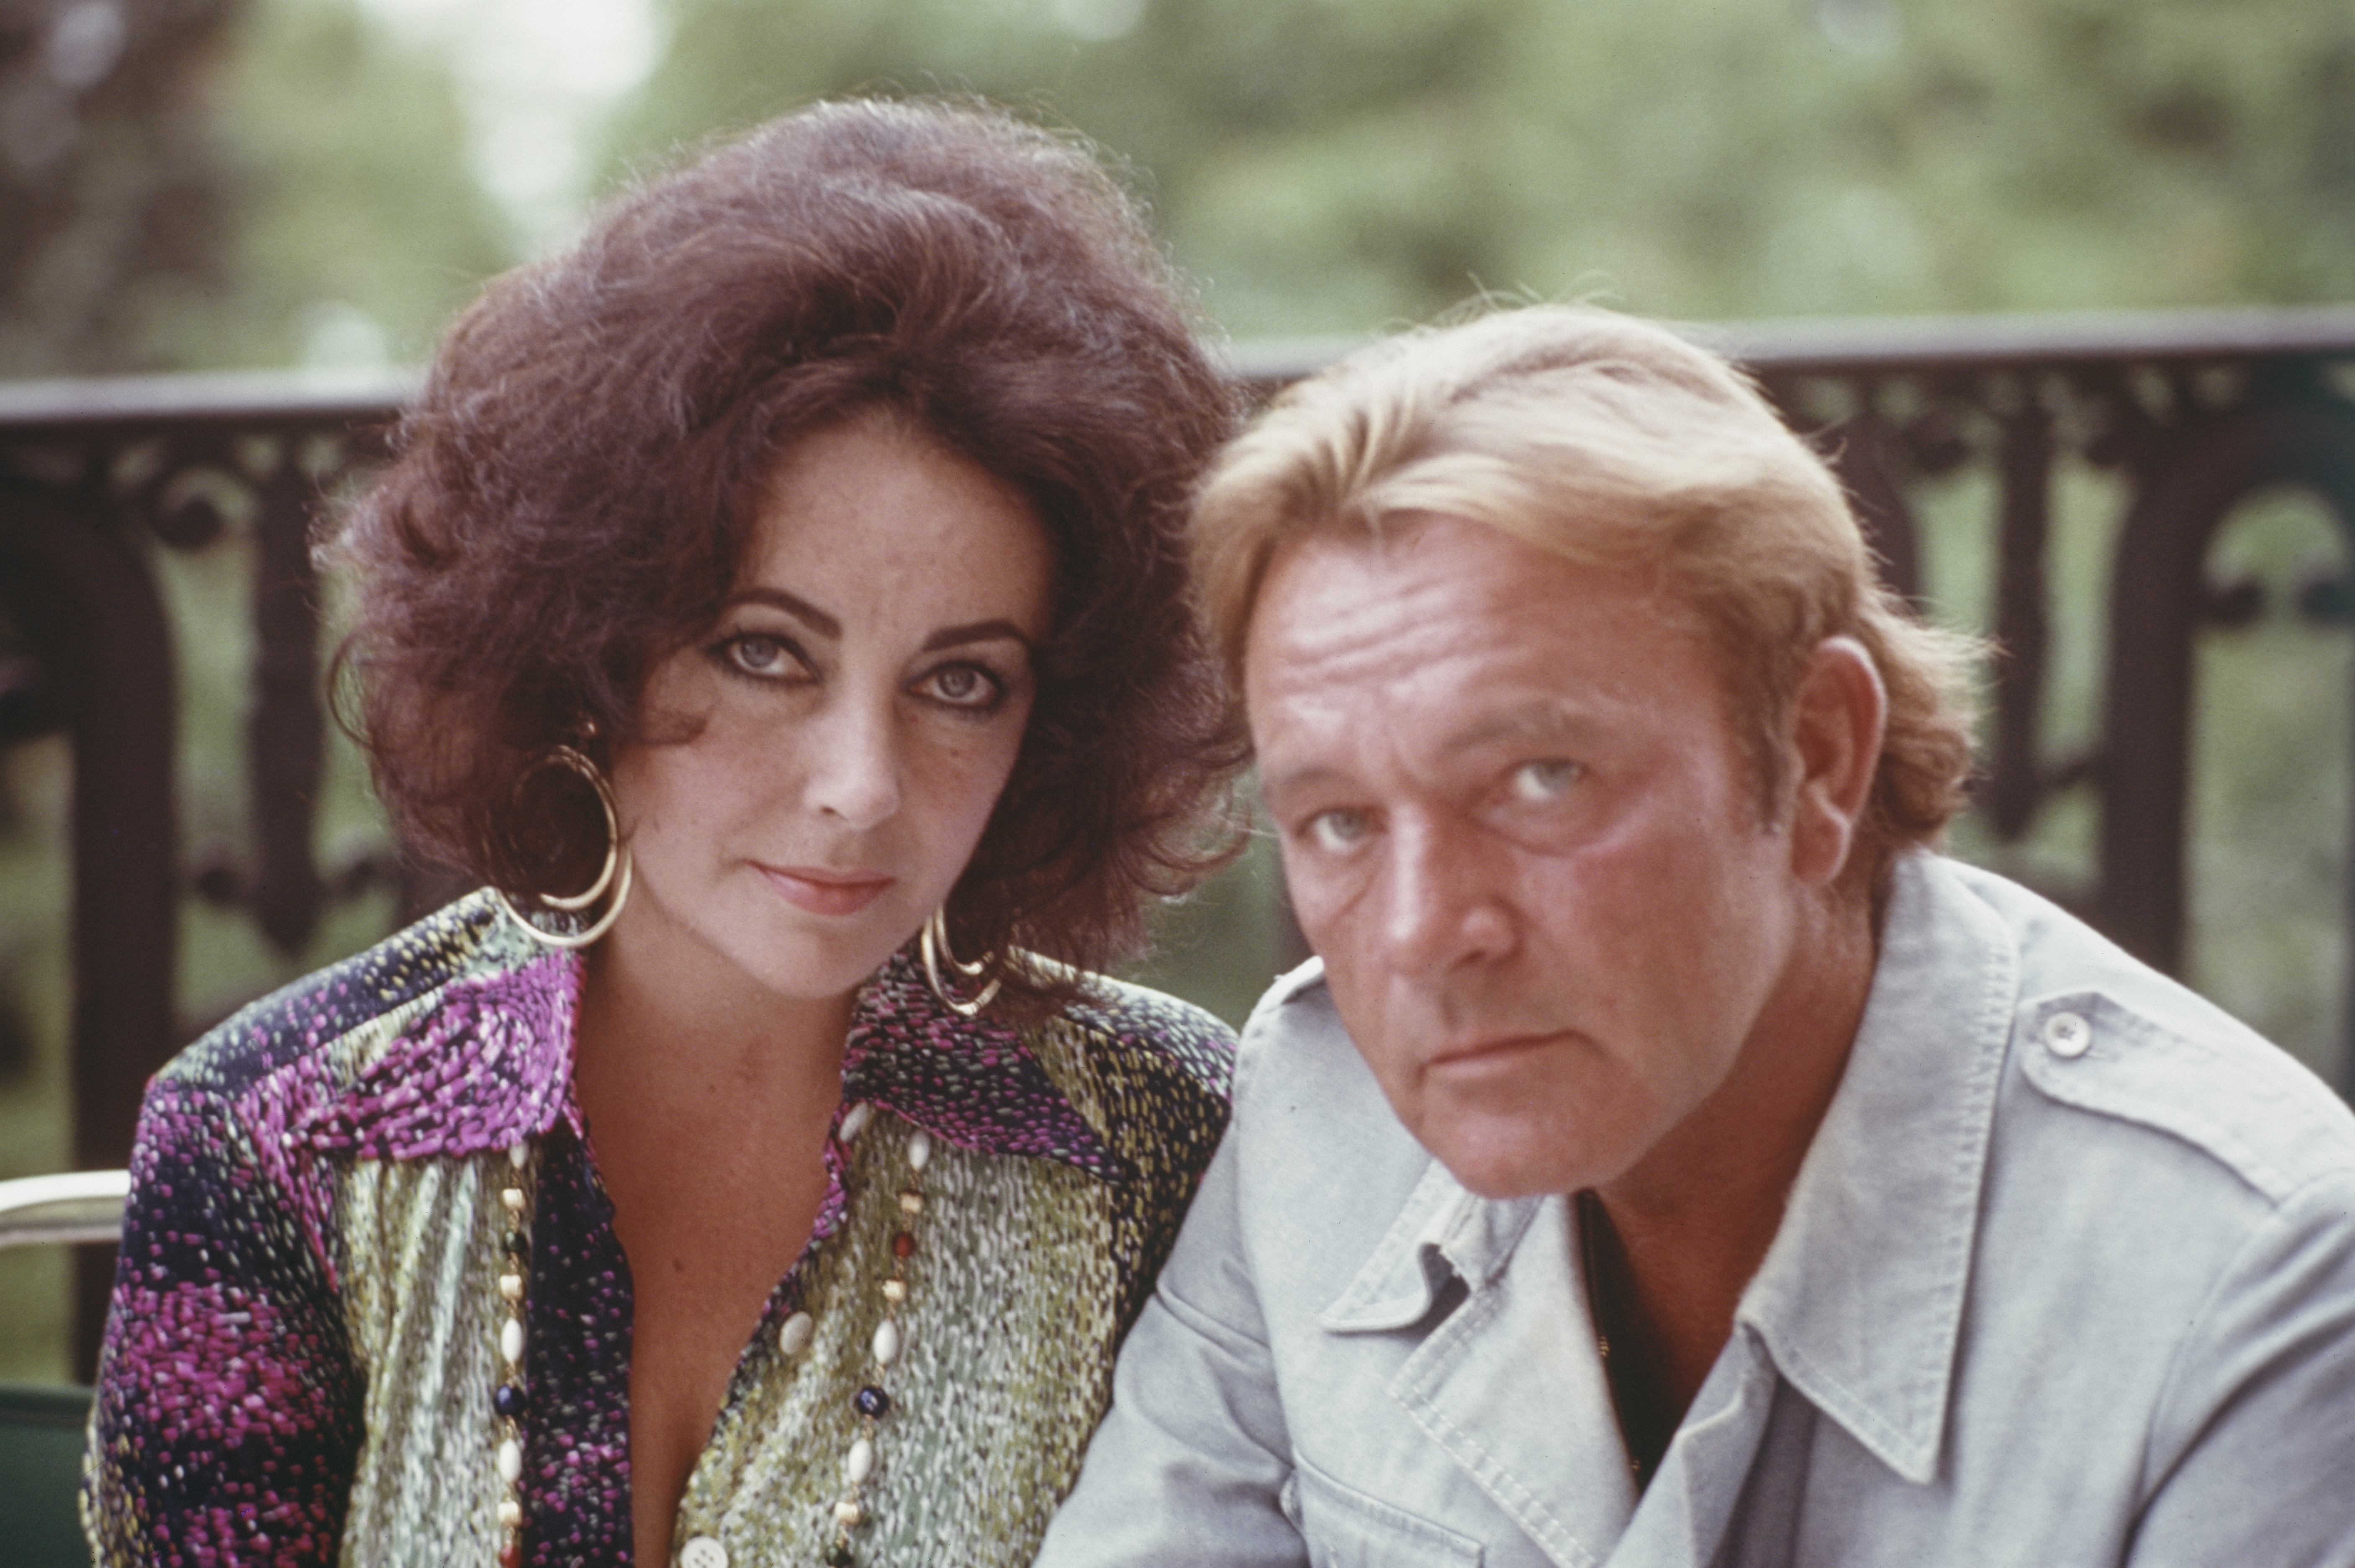 Elizabeth Taylor and Richard Burton in 1980. | Source: Getty Images